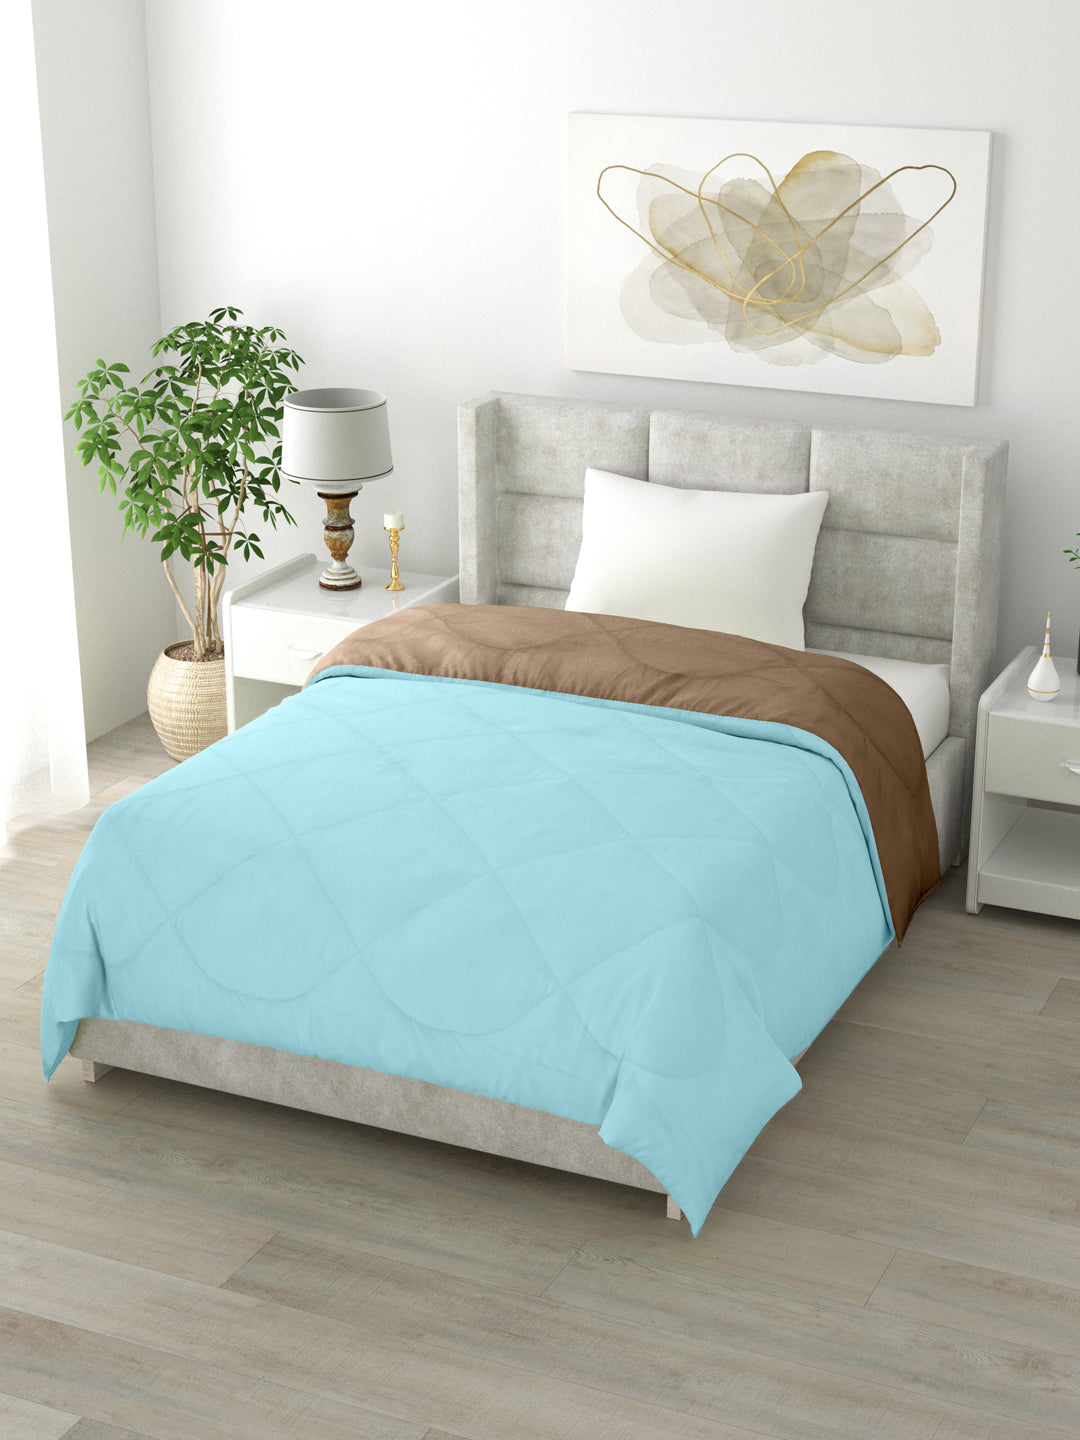 Reversible Single Bed Comforter 200 GSM 60x90 Inches (Taupe & Aqua Blue)